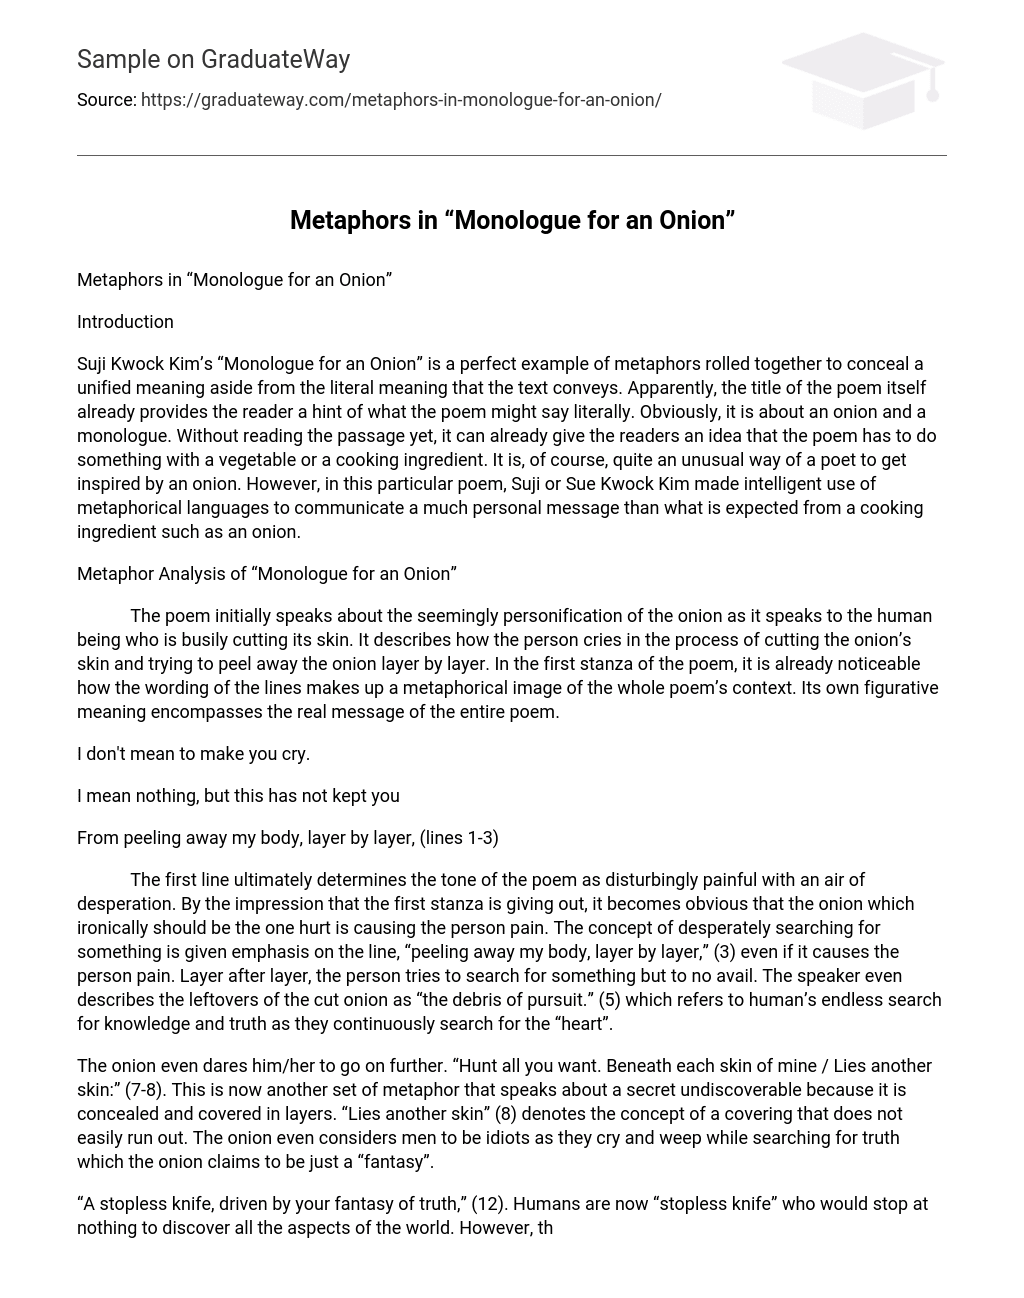 Metaphors in “Monologue for an Onion” Analysis